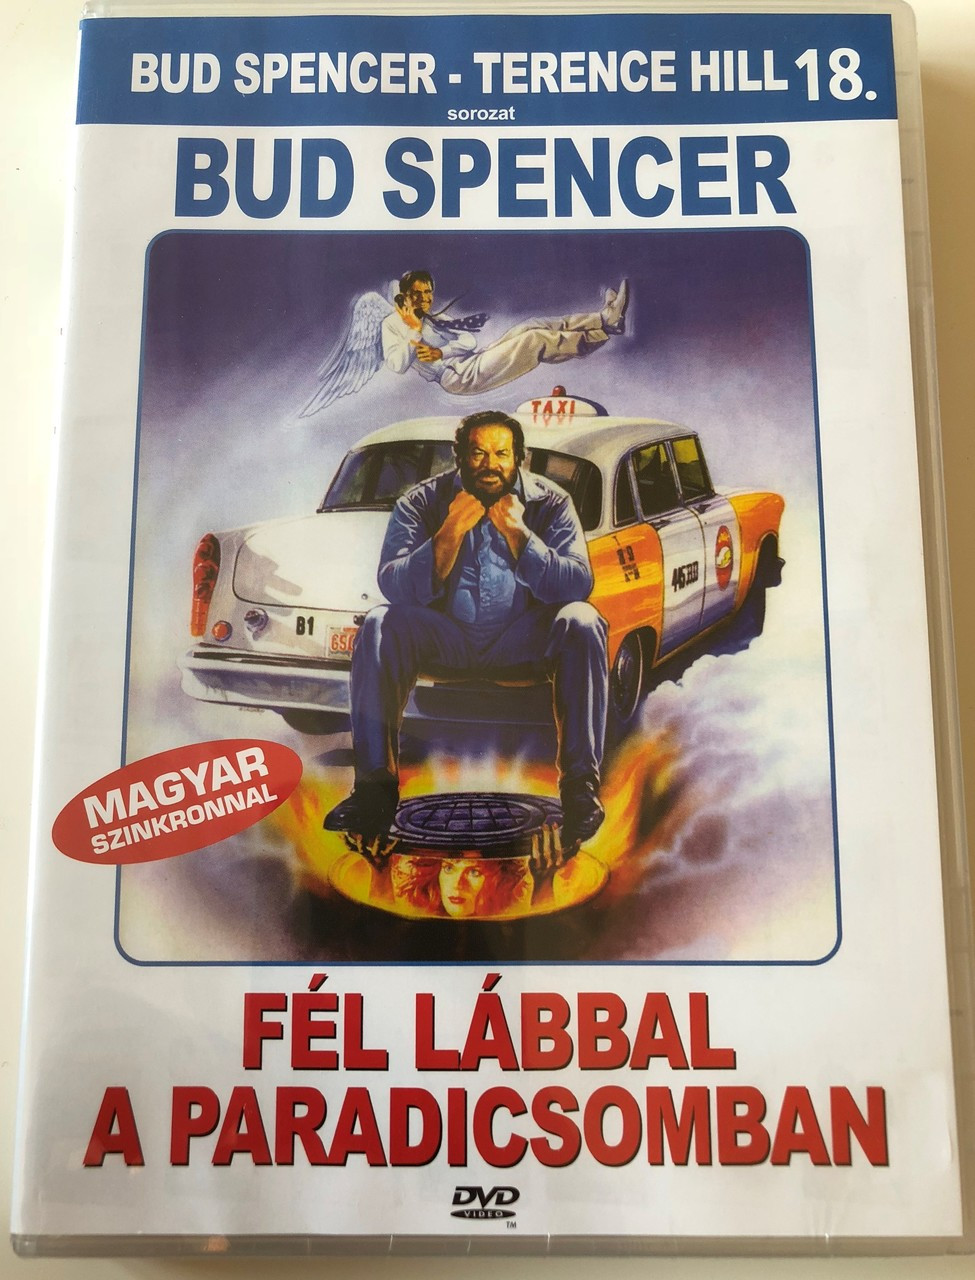 Fél lábbal a paradicsomban DVD 1990 Un Piede in paradiso (Speaking of the  devil) / Directed by E.B. Clucher / Starring Bud Spencer, Thierry  Lhermitte, Carol Alt / Bud Spencer-Terence Hill Sorozat 18. -  bibleinmylanguage